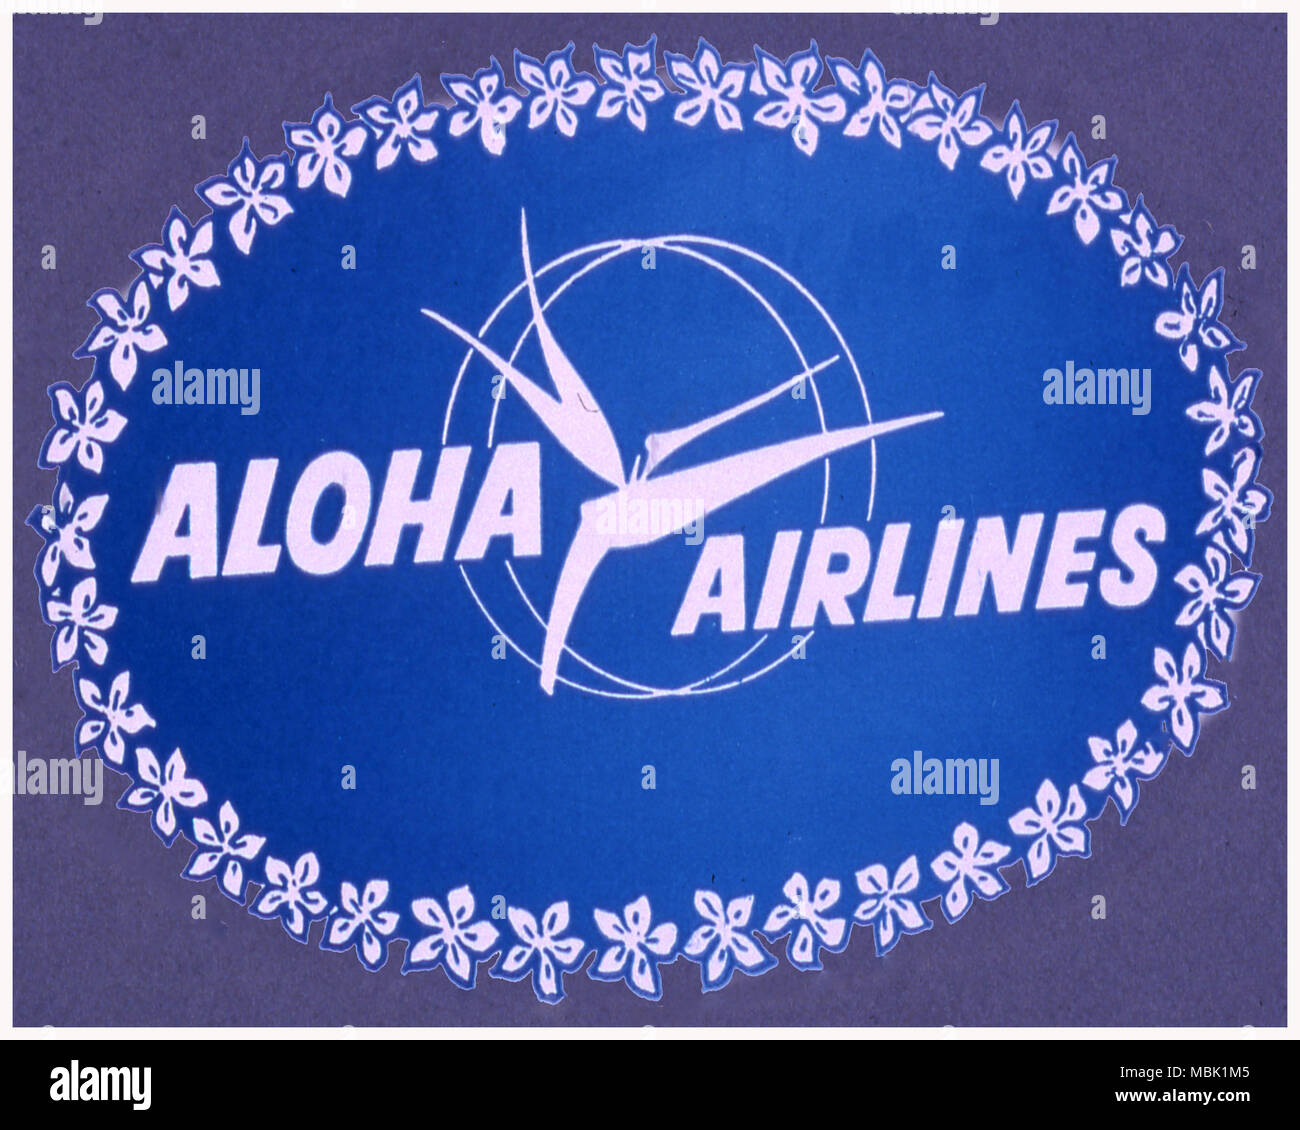 Aloha Airlines Banque D'Images